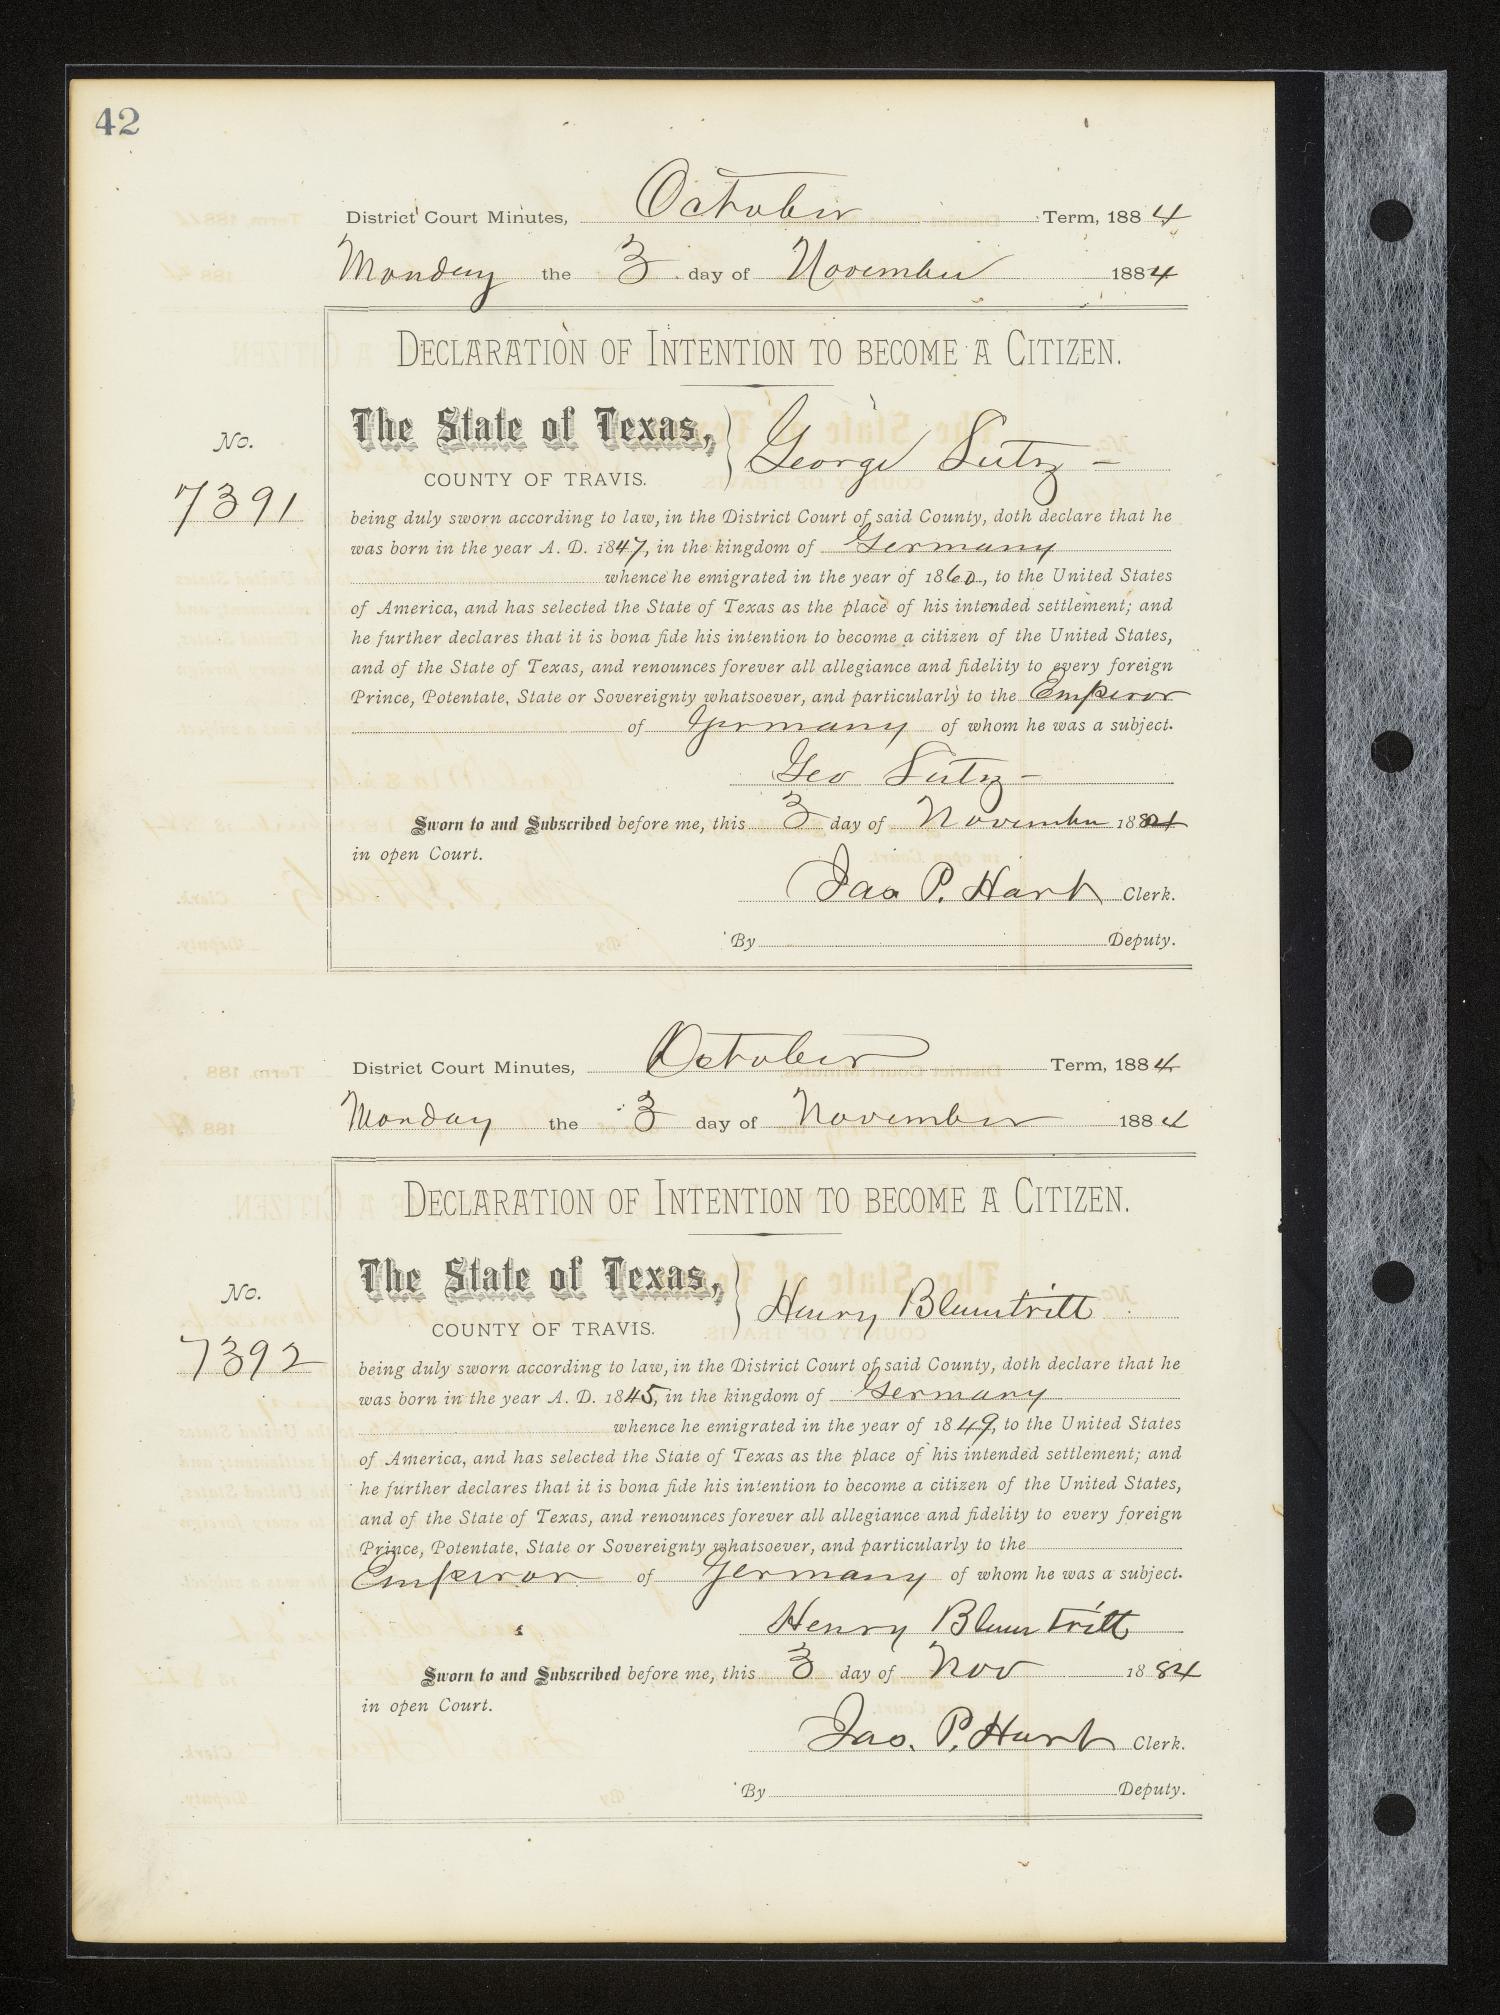 Travis County Naturalization Records: Declaration Minutes A, pages 1-208
                                                
                                                    42
                                                